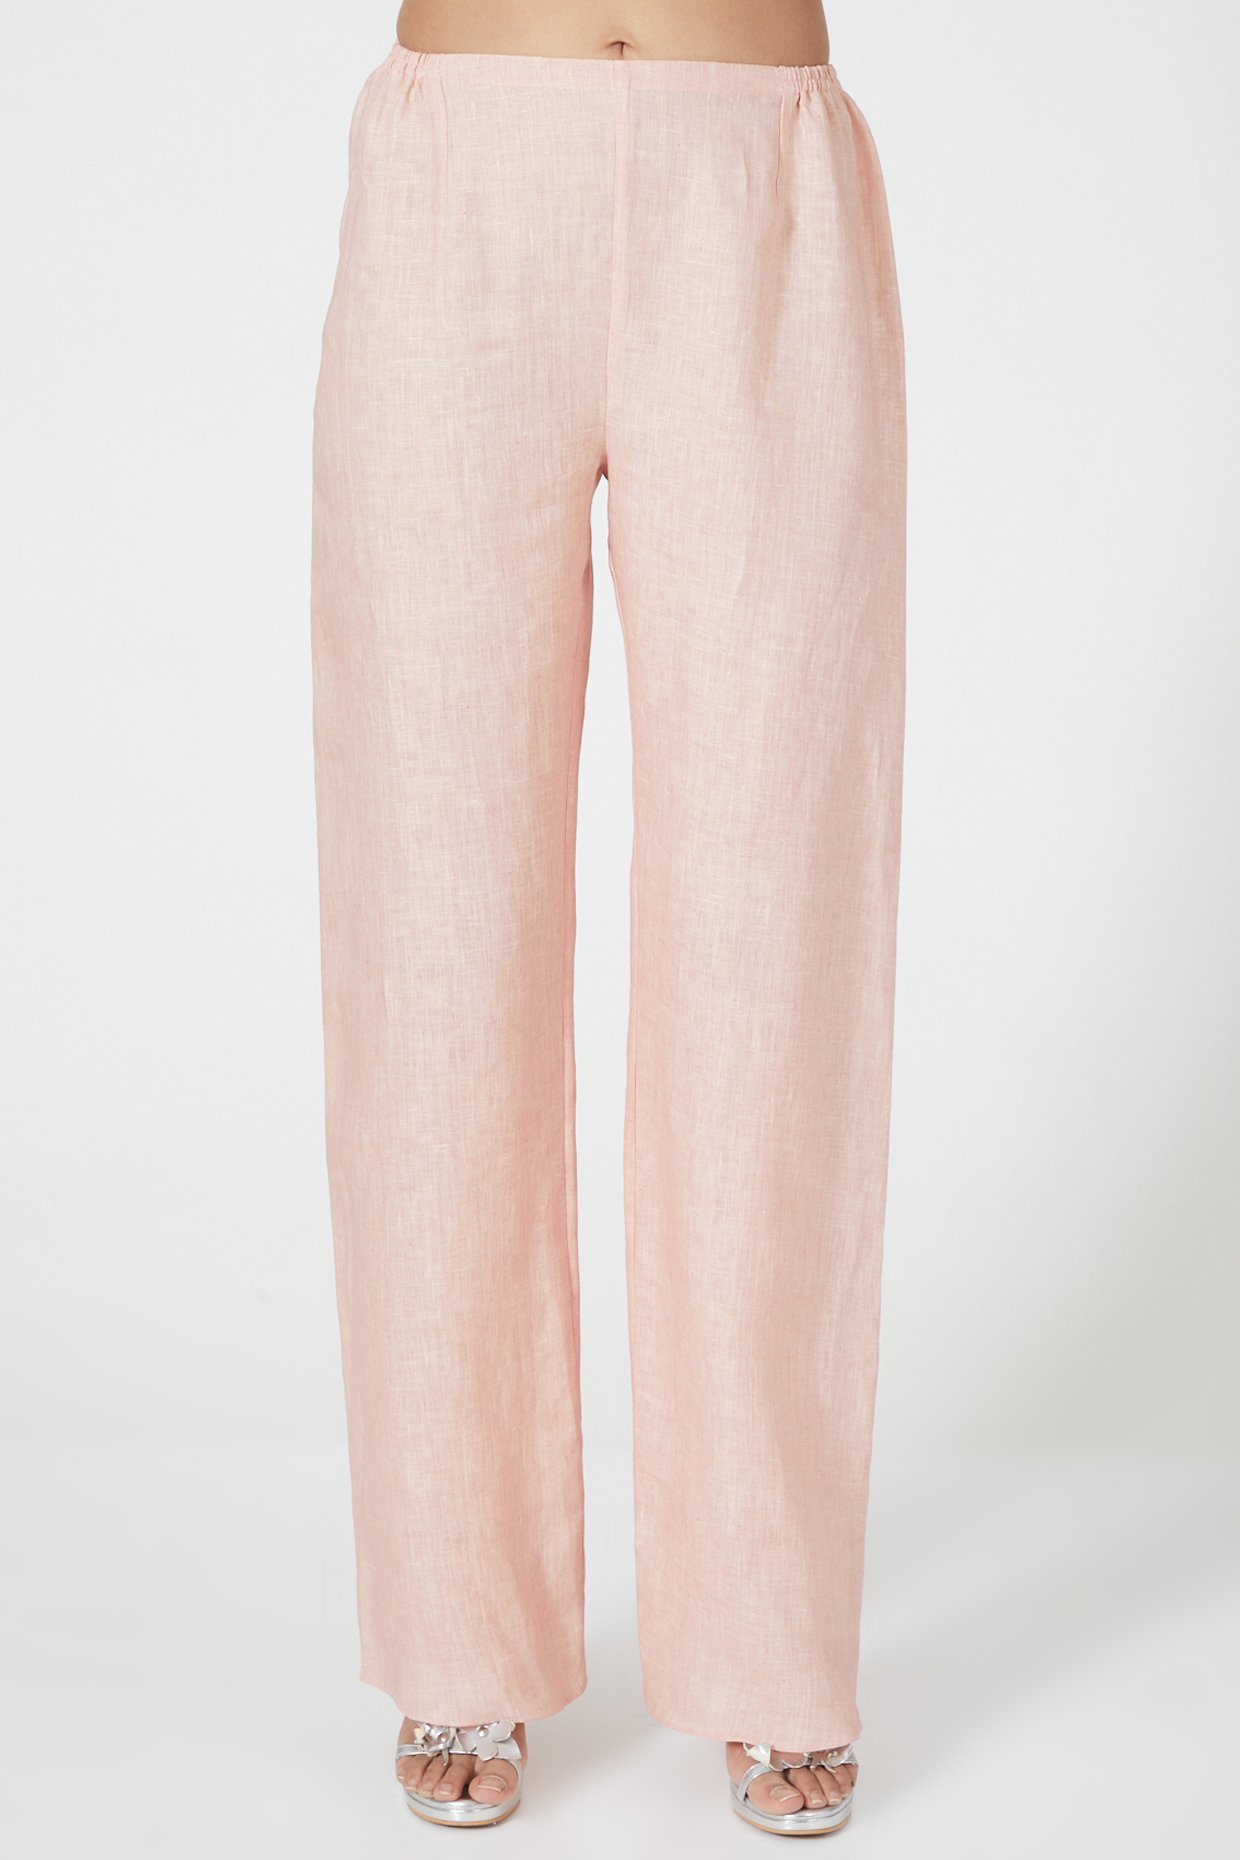 Linen Rose Pink solid cigrette pant for Woman